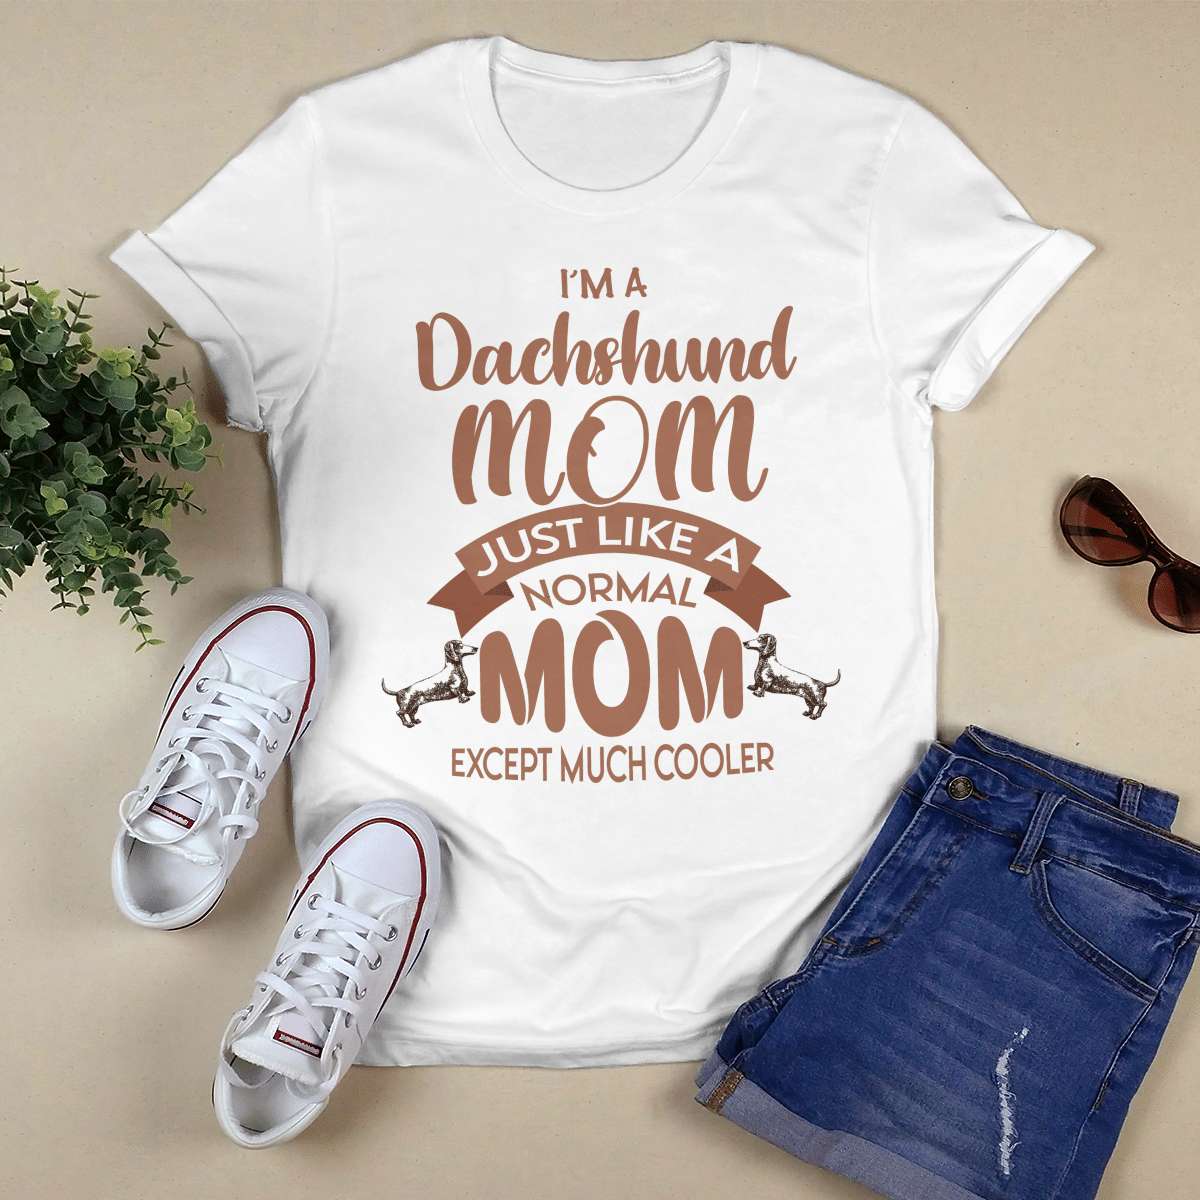 I'm a Dachshund mom just like normal mom except much cooler - Dog mom, mom of Dachshund